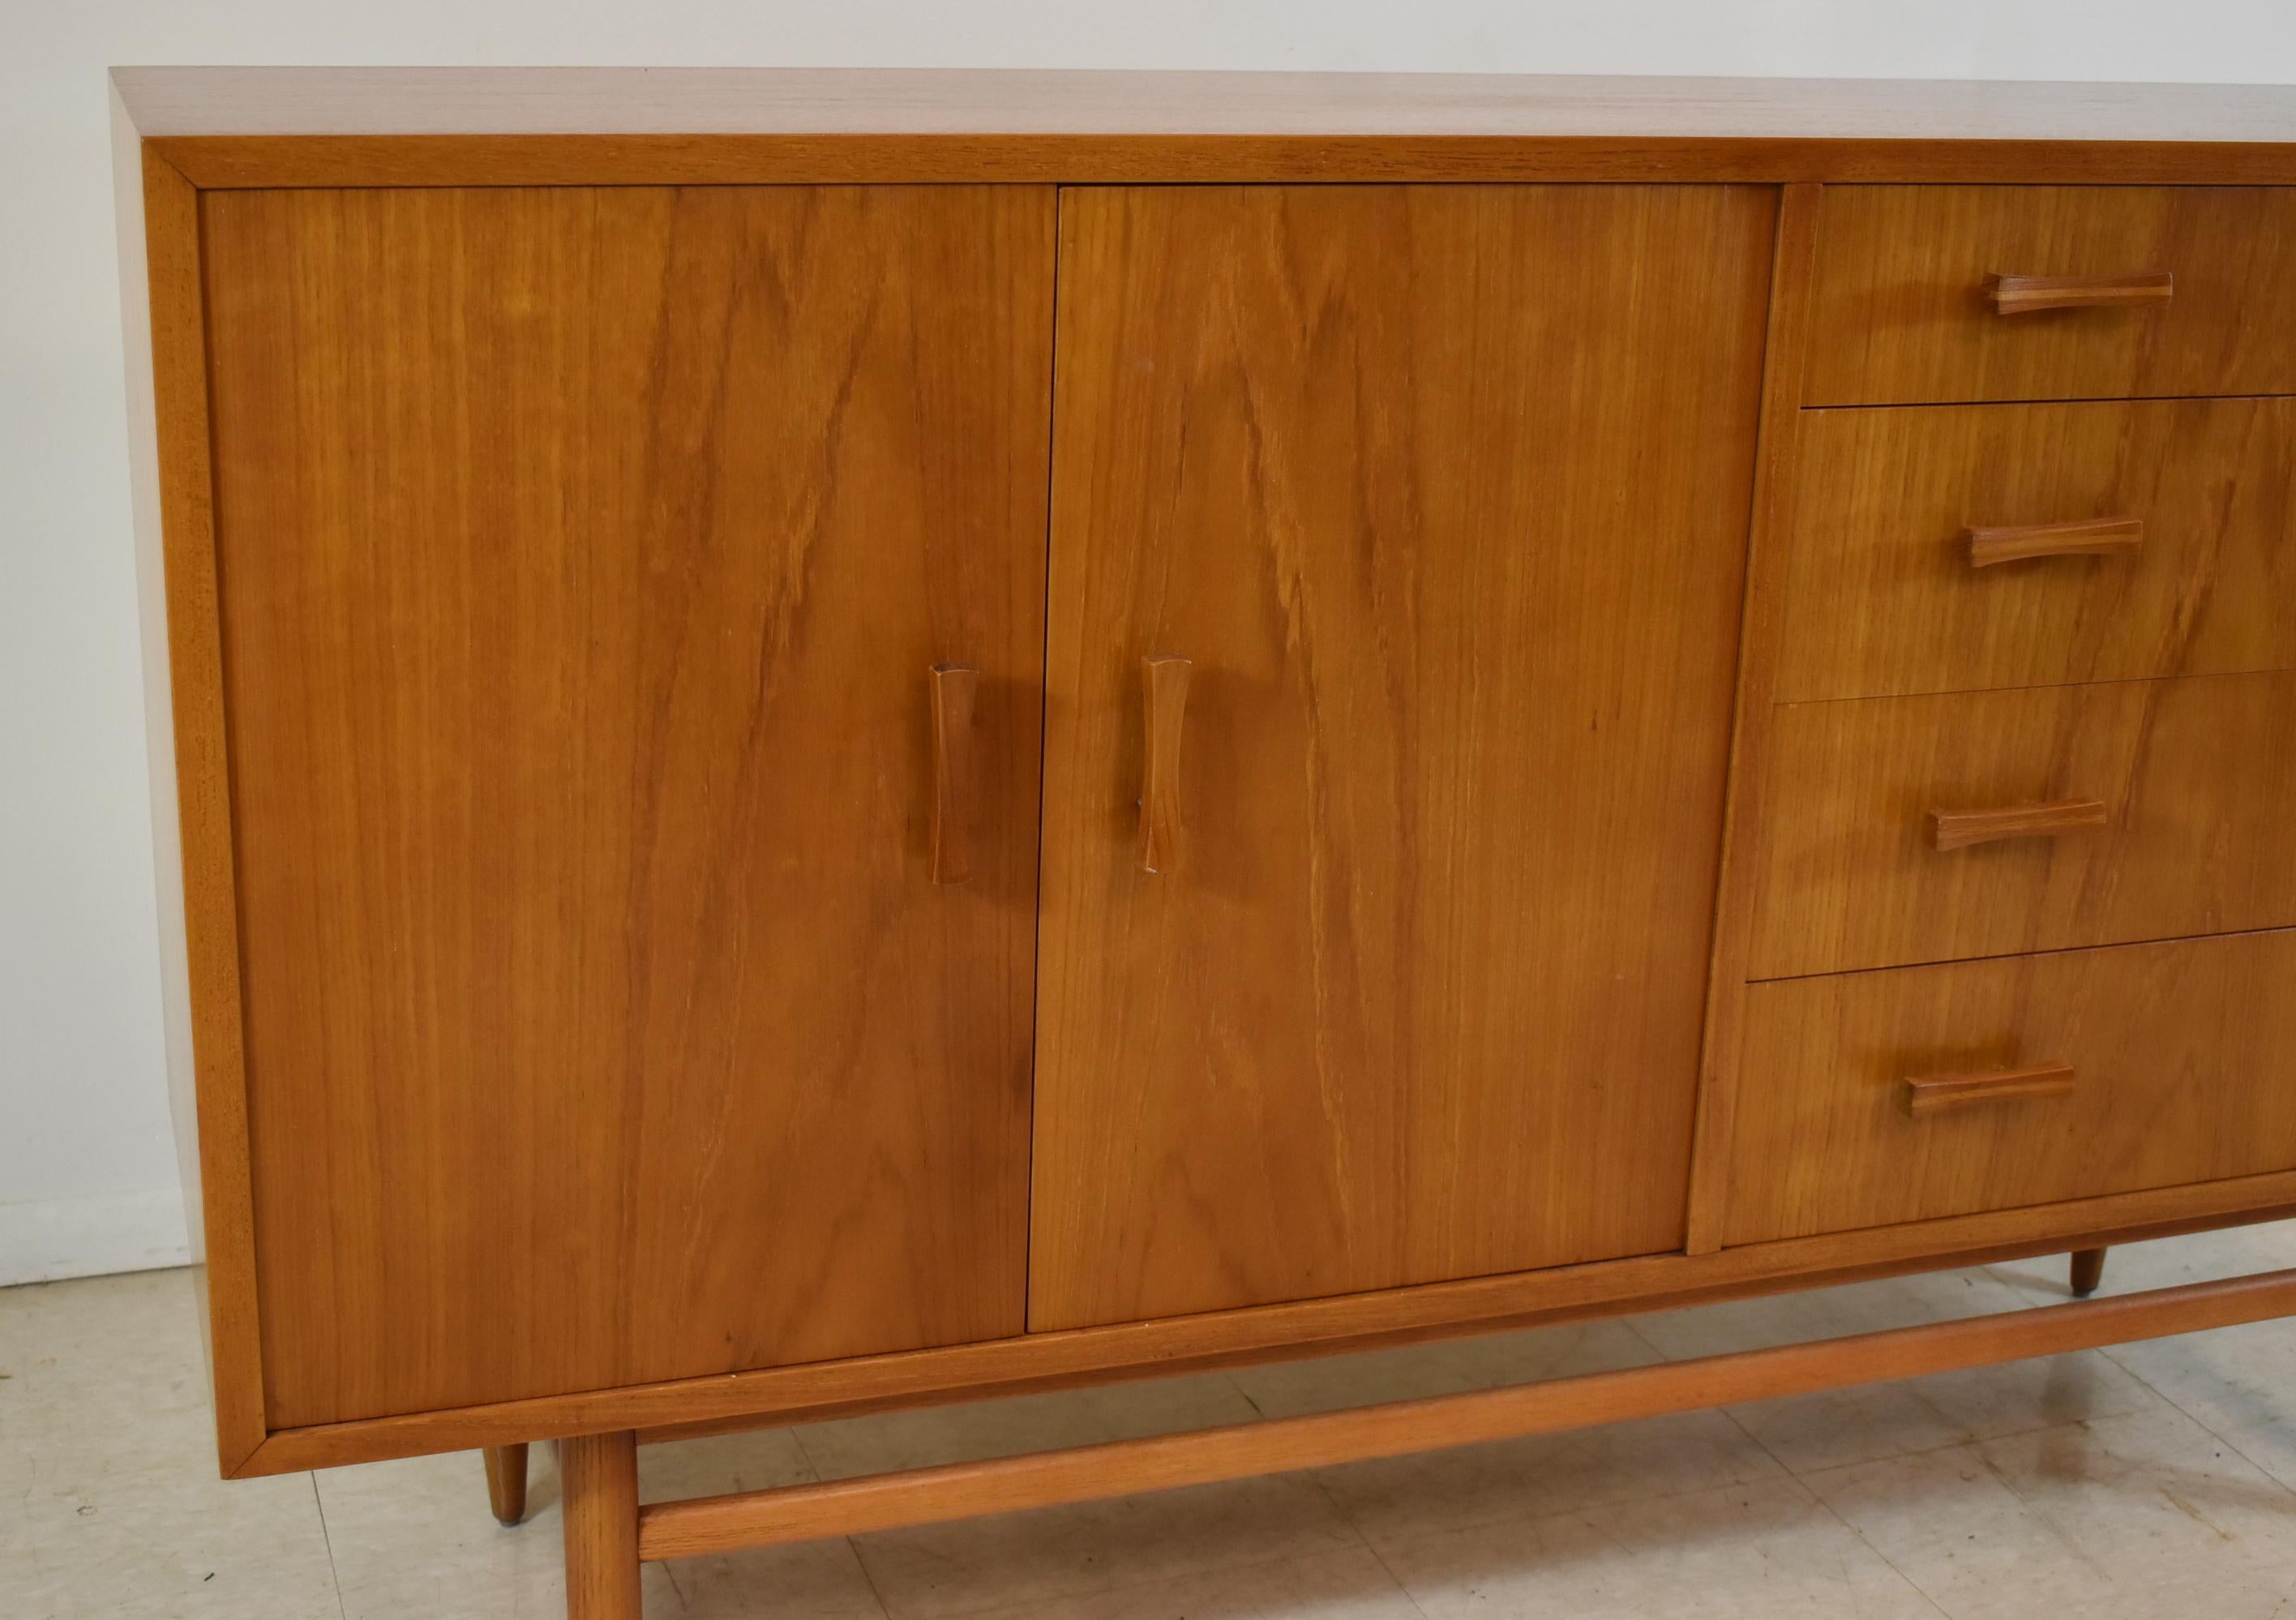 Paul McCobb planner group style credenza made of teak wood with bow tie shaped handles, contains 4 dovetailed drawers, adjustable shelving. In excellent condition. Dimensions: 60